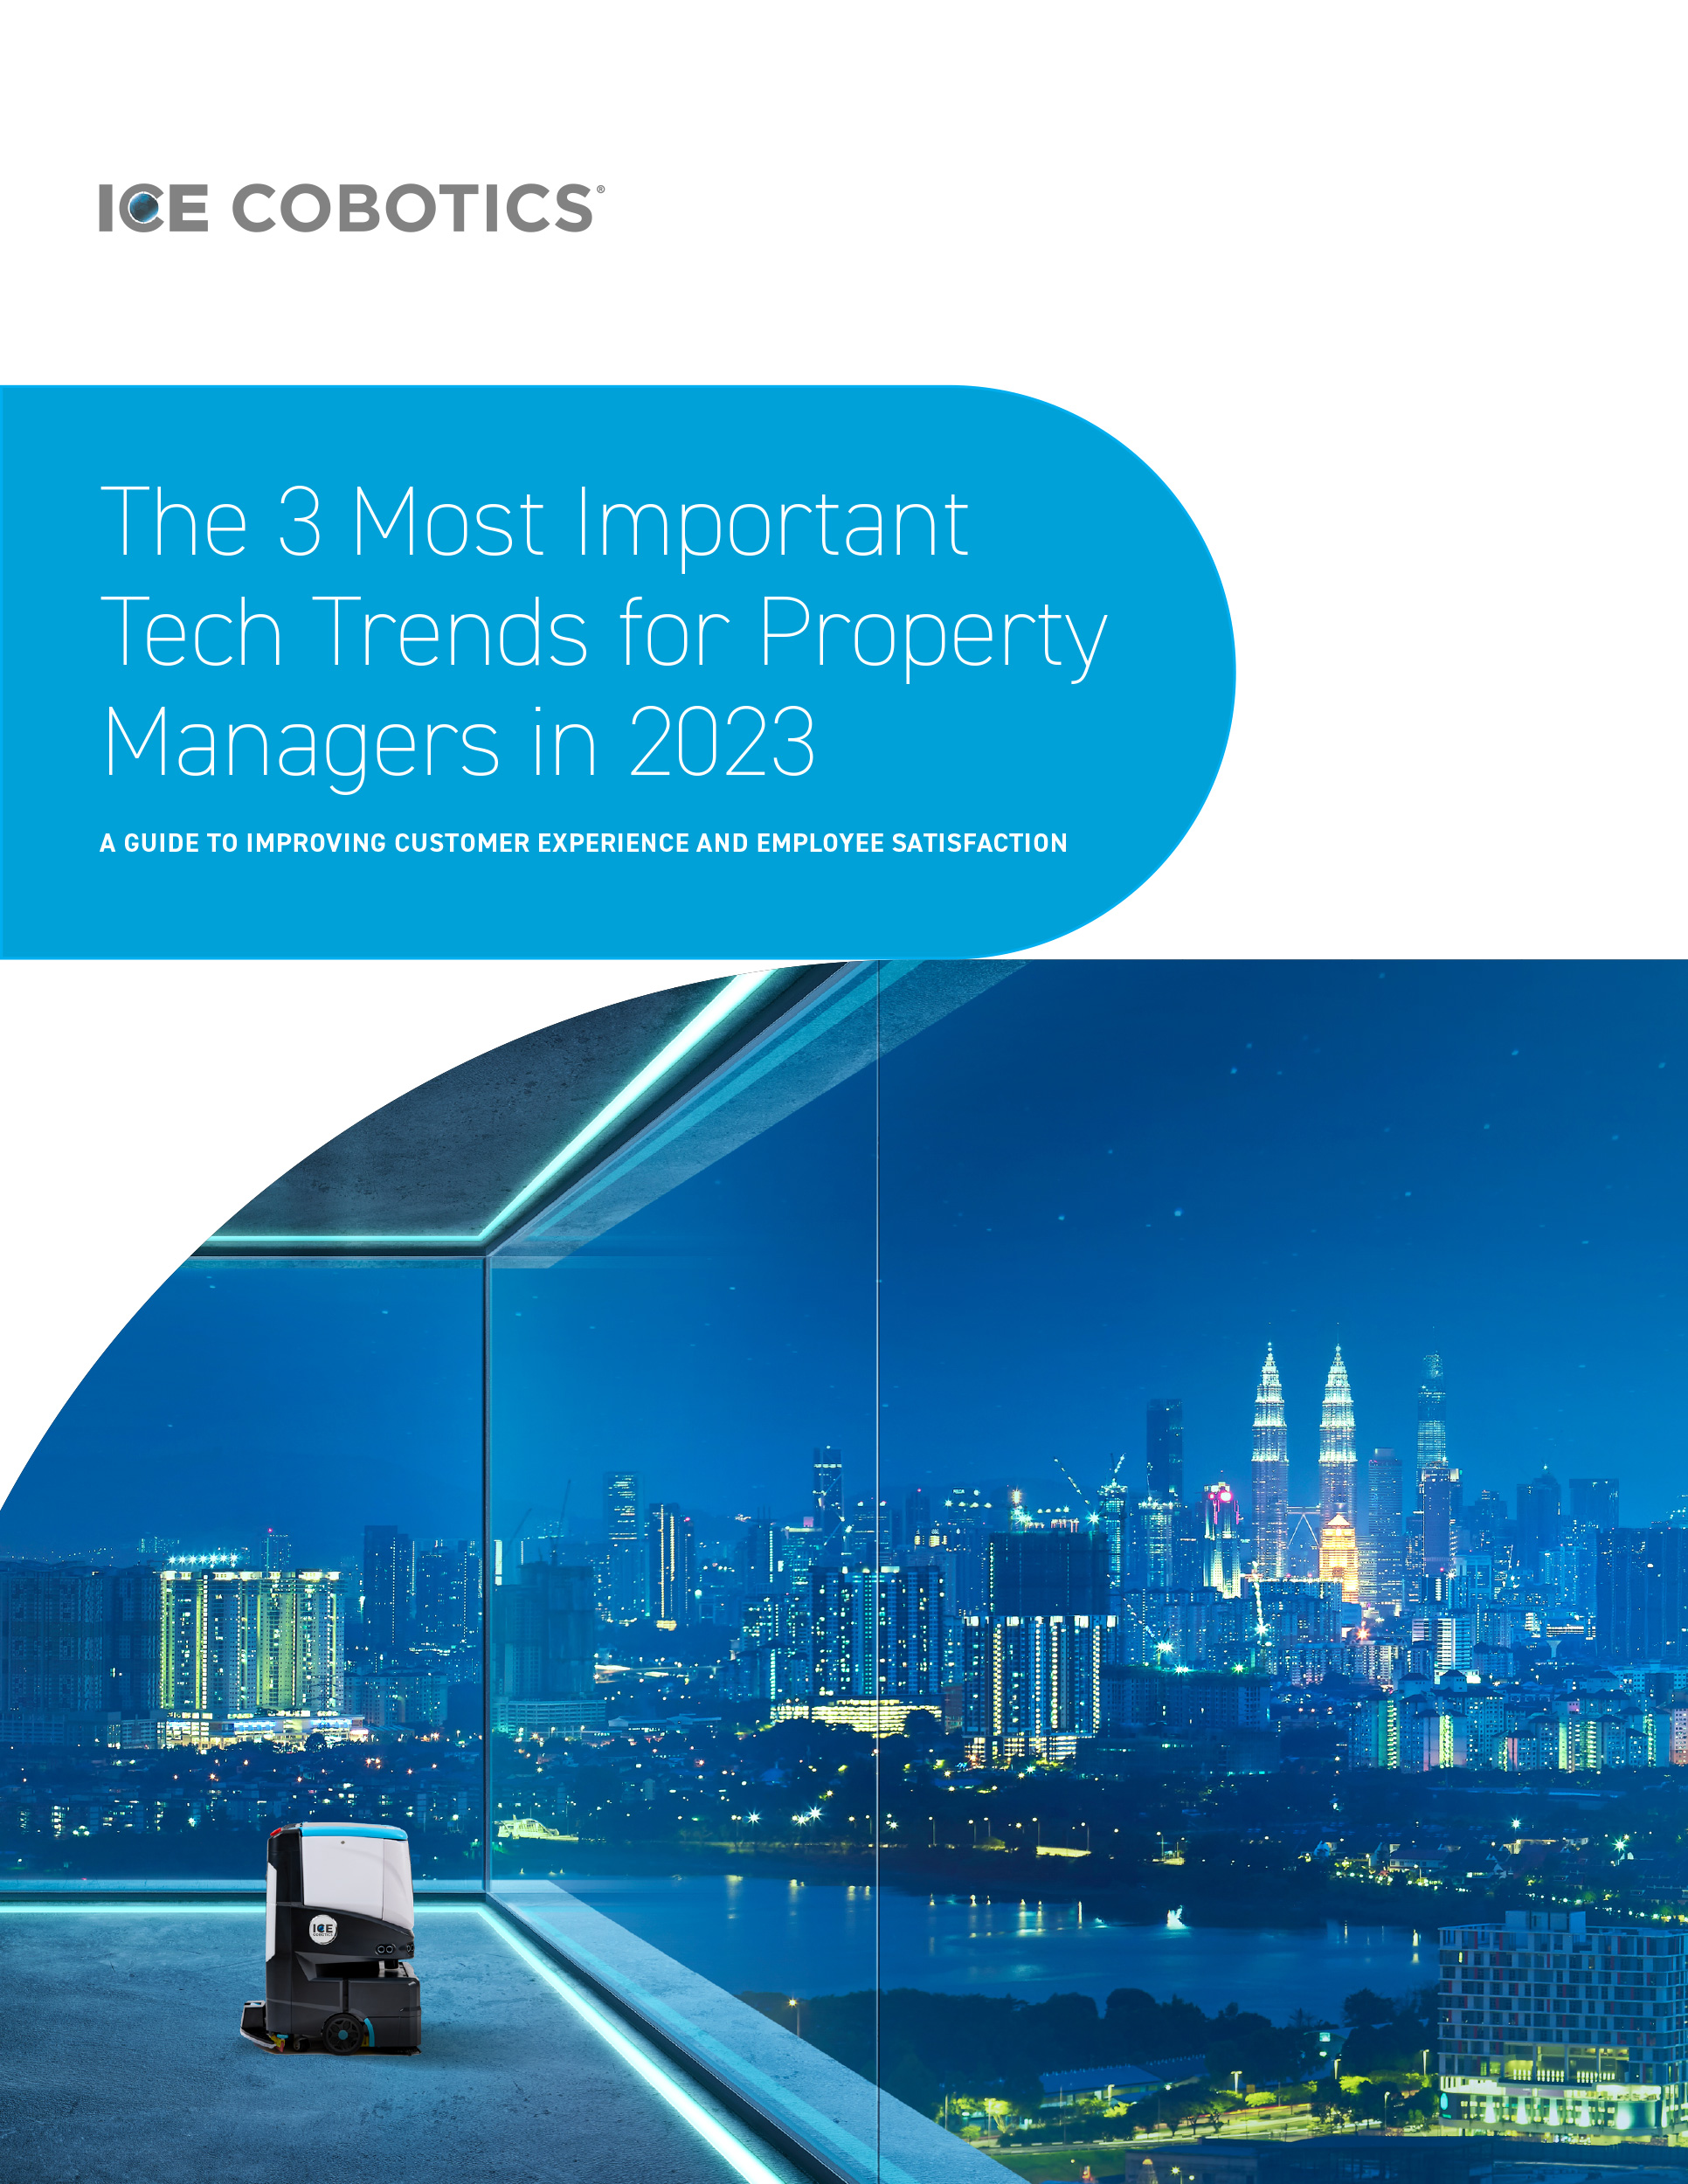 The 3 Most Important Tech Trends for Property Managers  in 2023